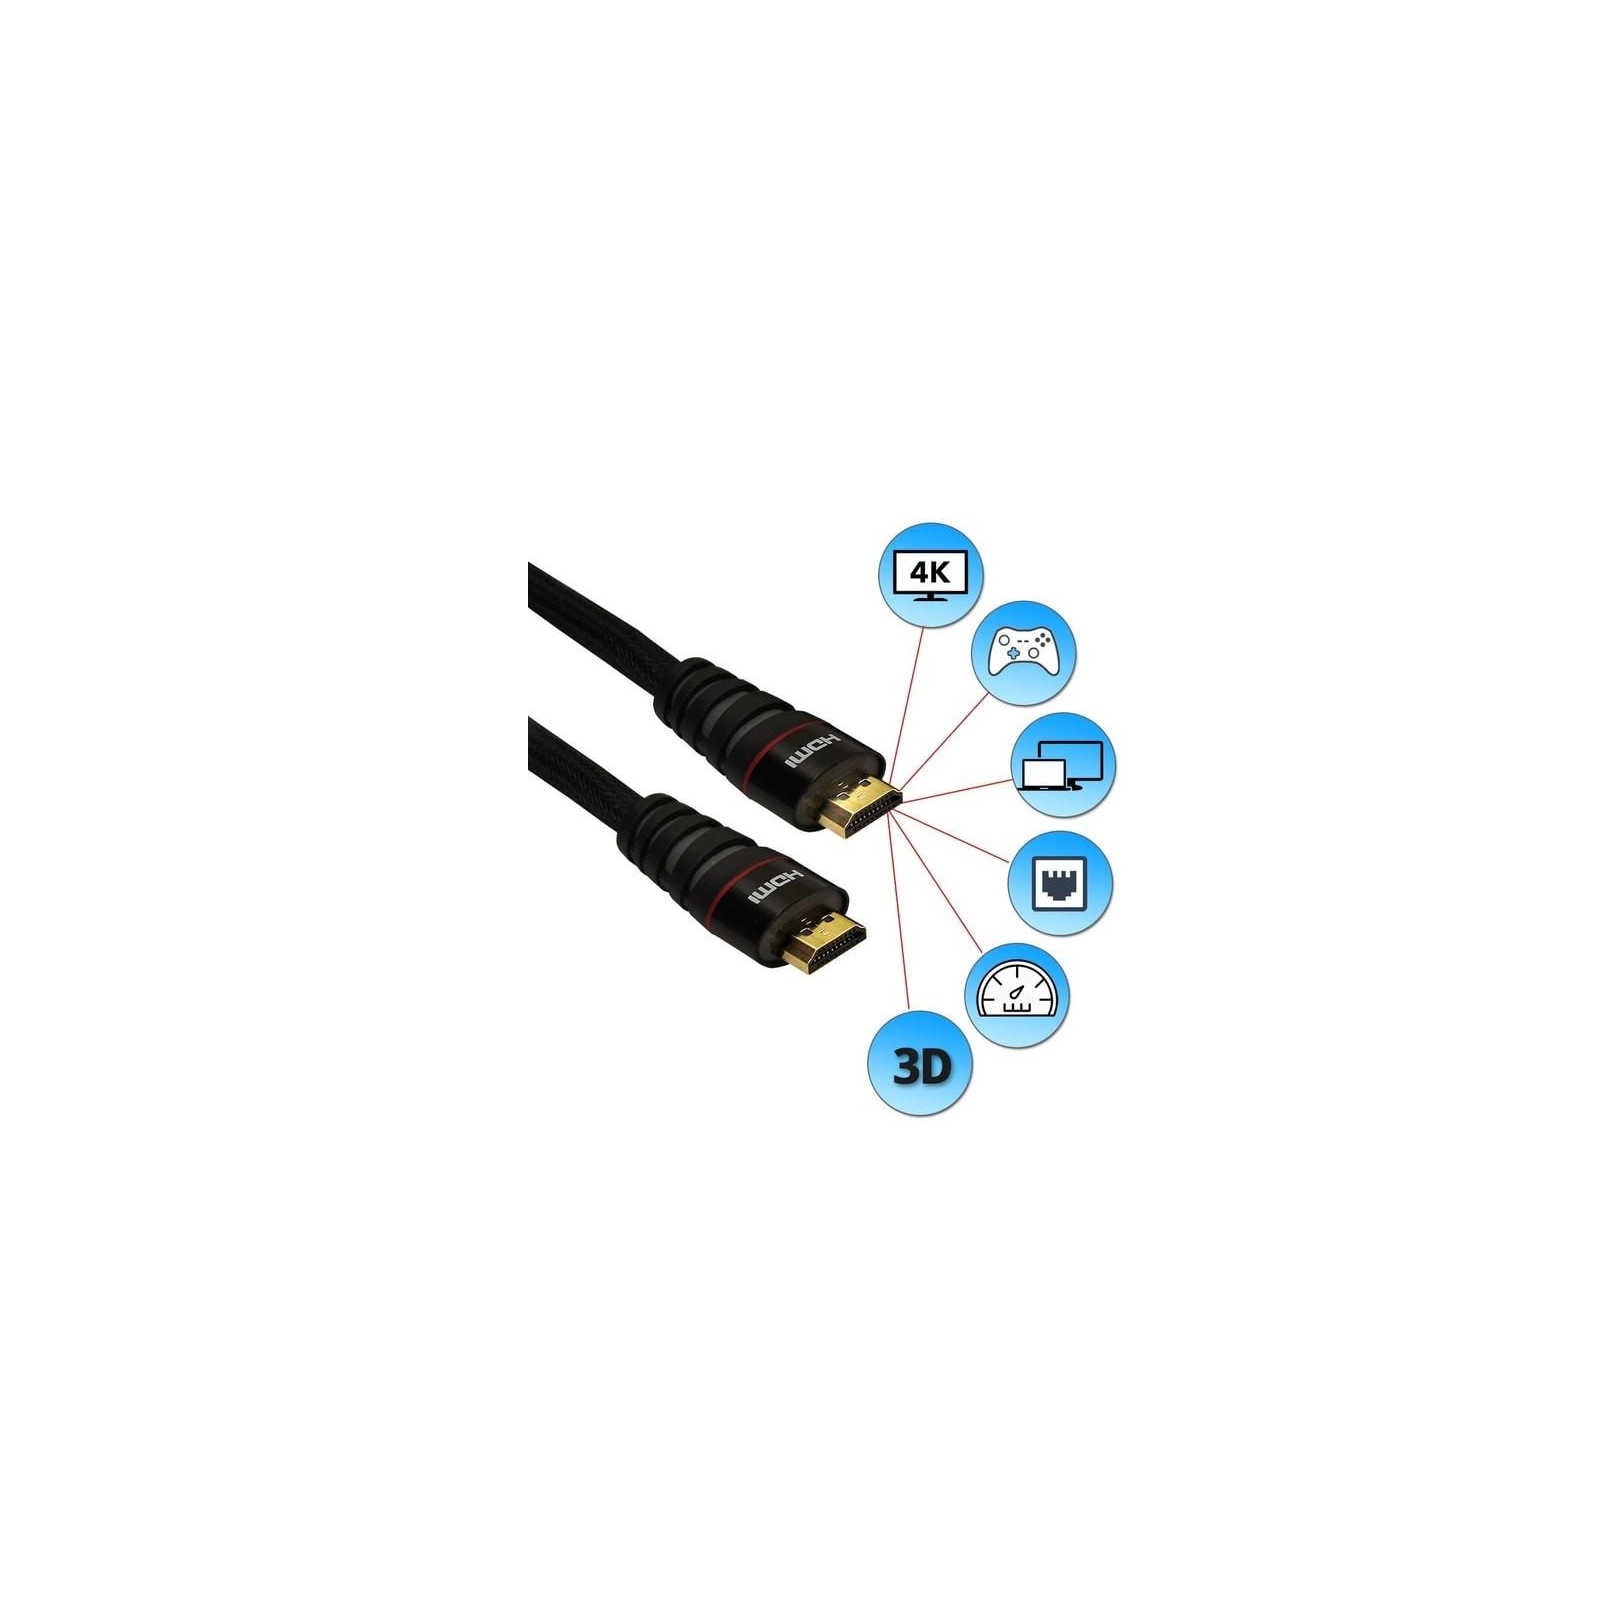 High Speed HDMI Cable 1.5m/3m/5m - China HDMI Cable and HDMI price